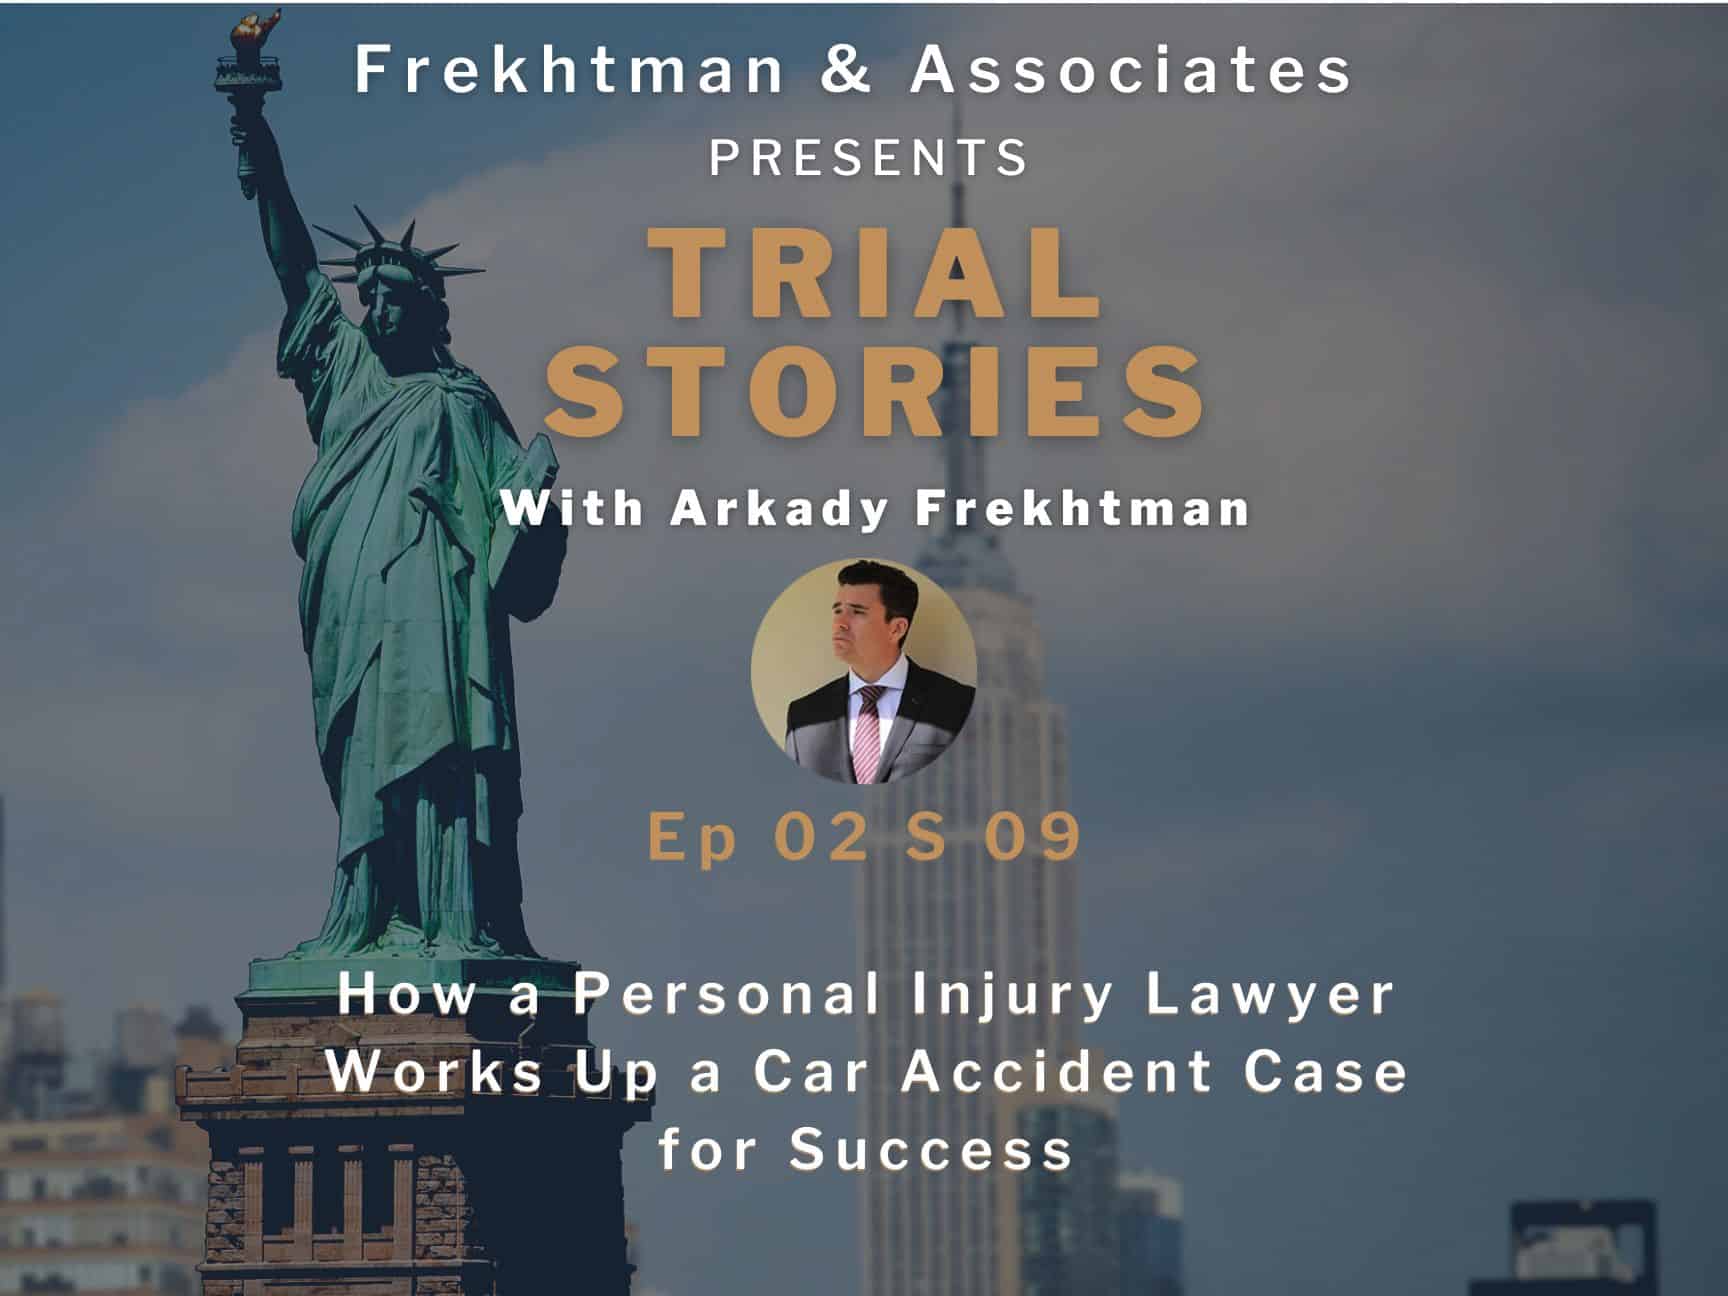 How a Personal Injury Lawyer Works Up a Car Accident Case for Success